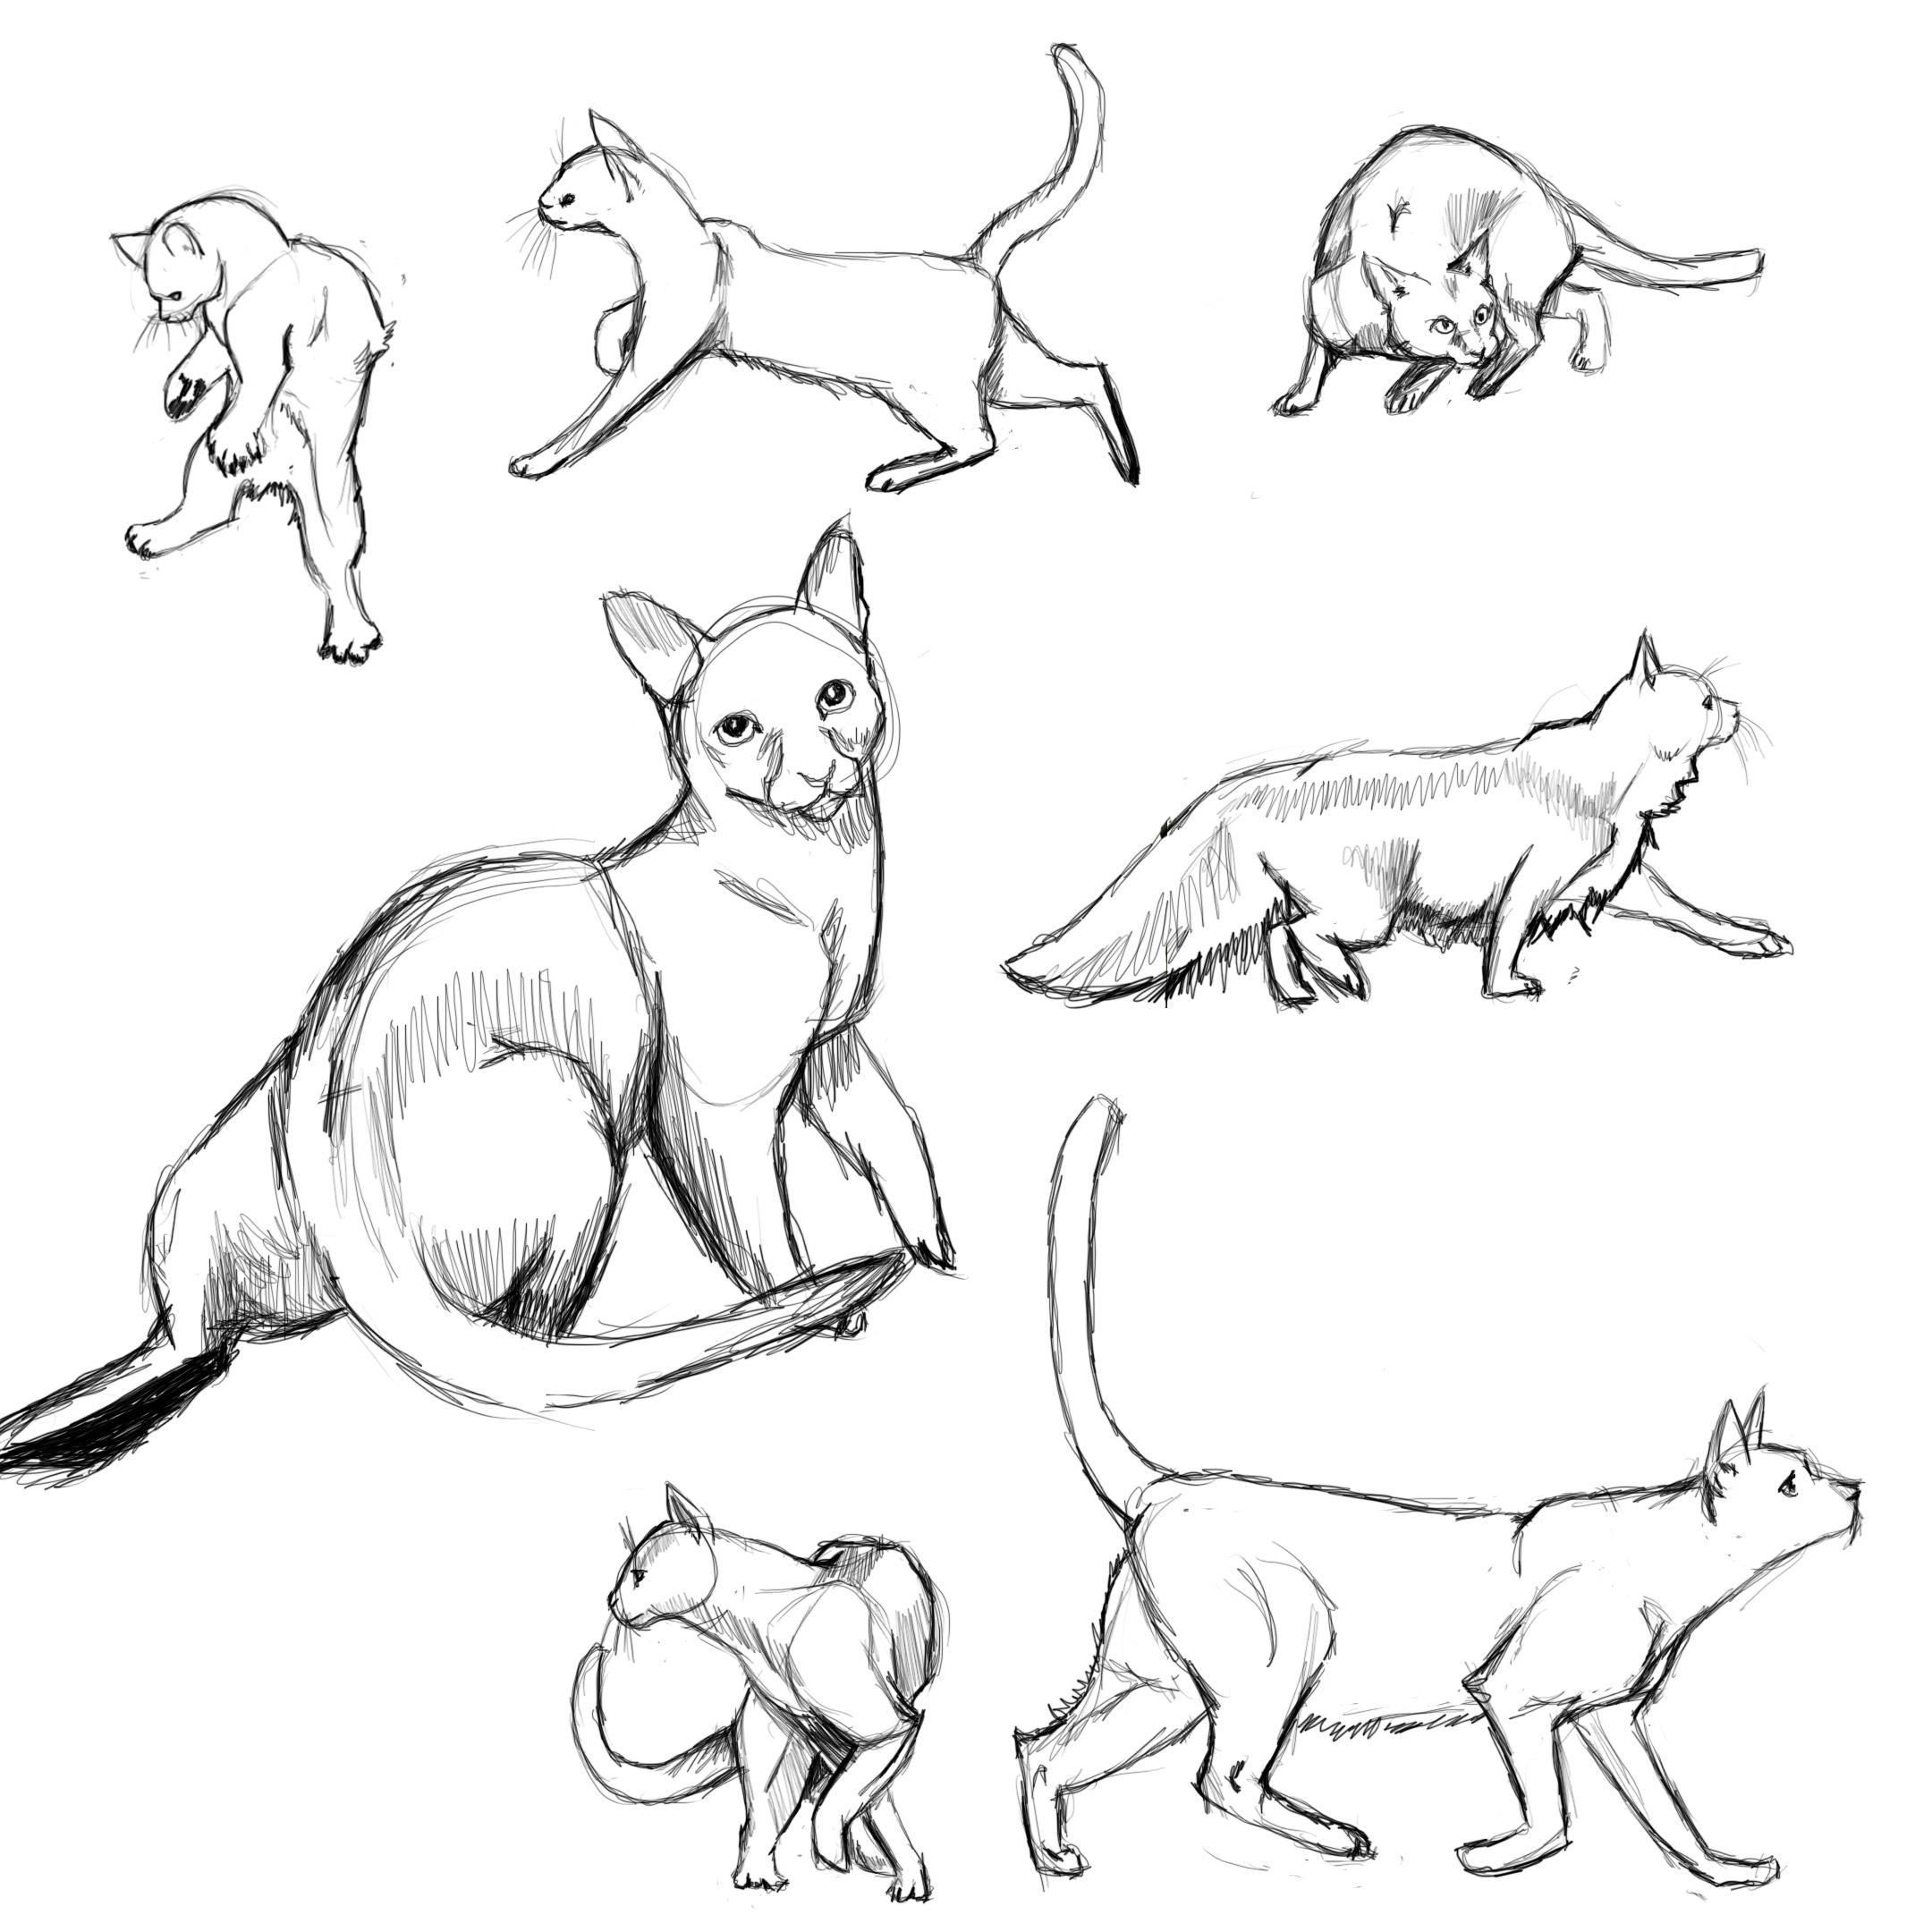 Cat Poses: study1 by FlameFoxe on DeviantArt